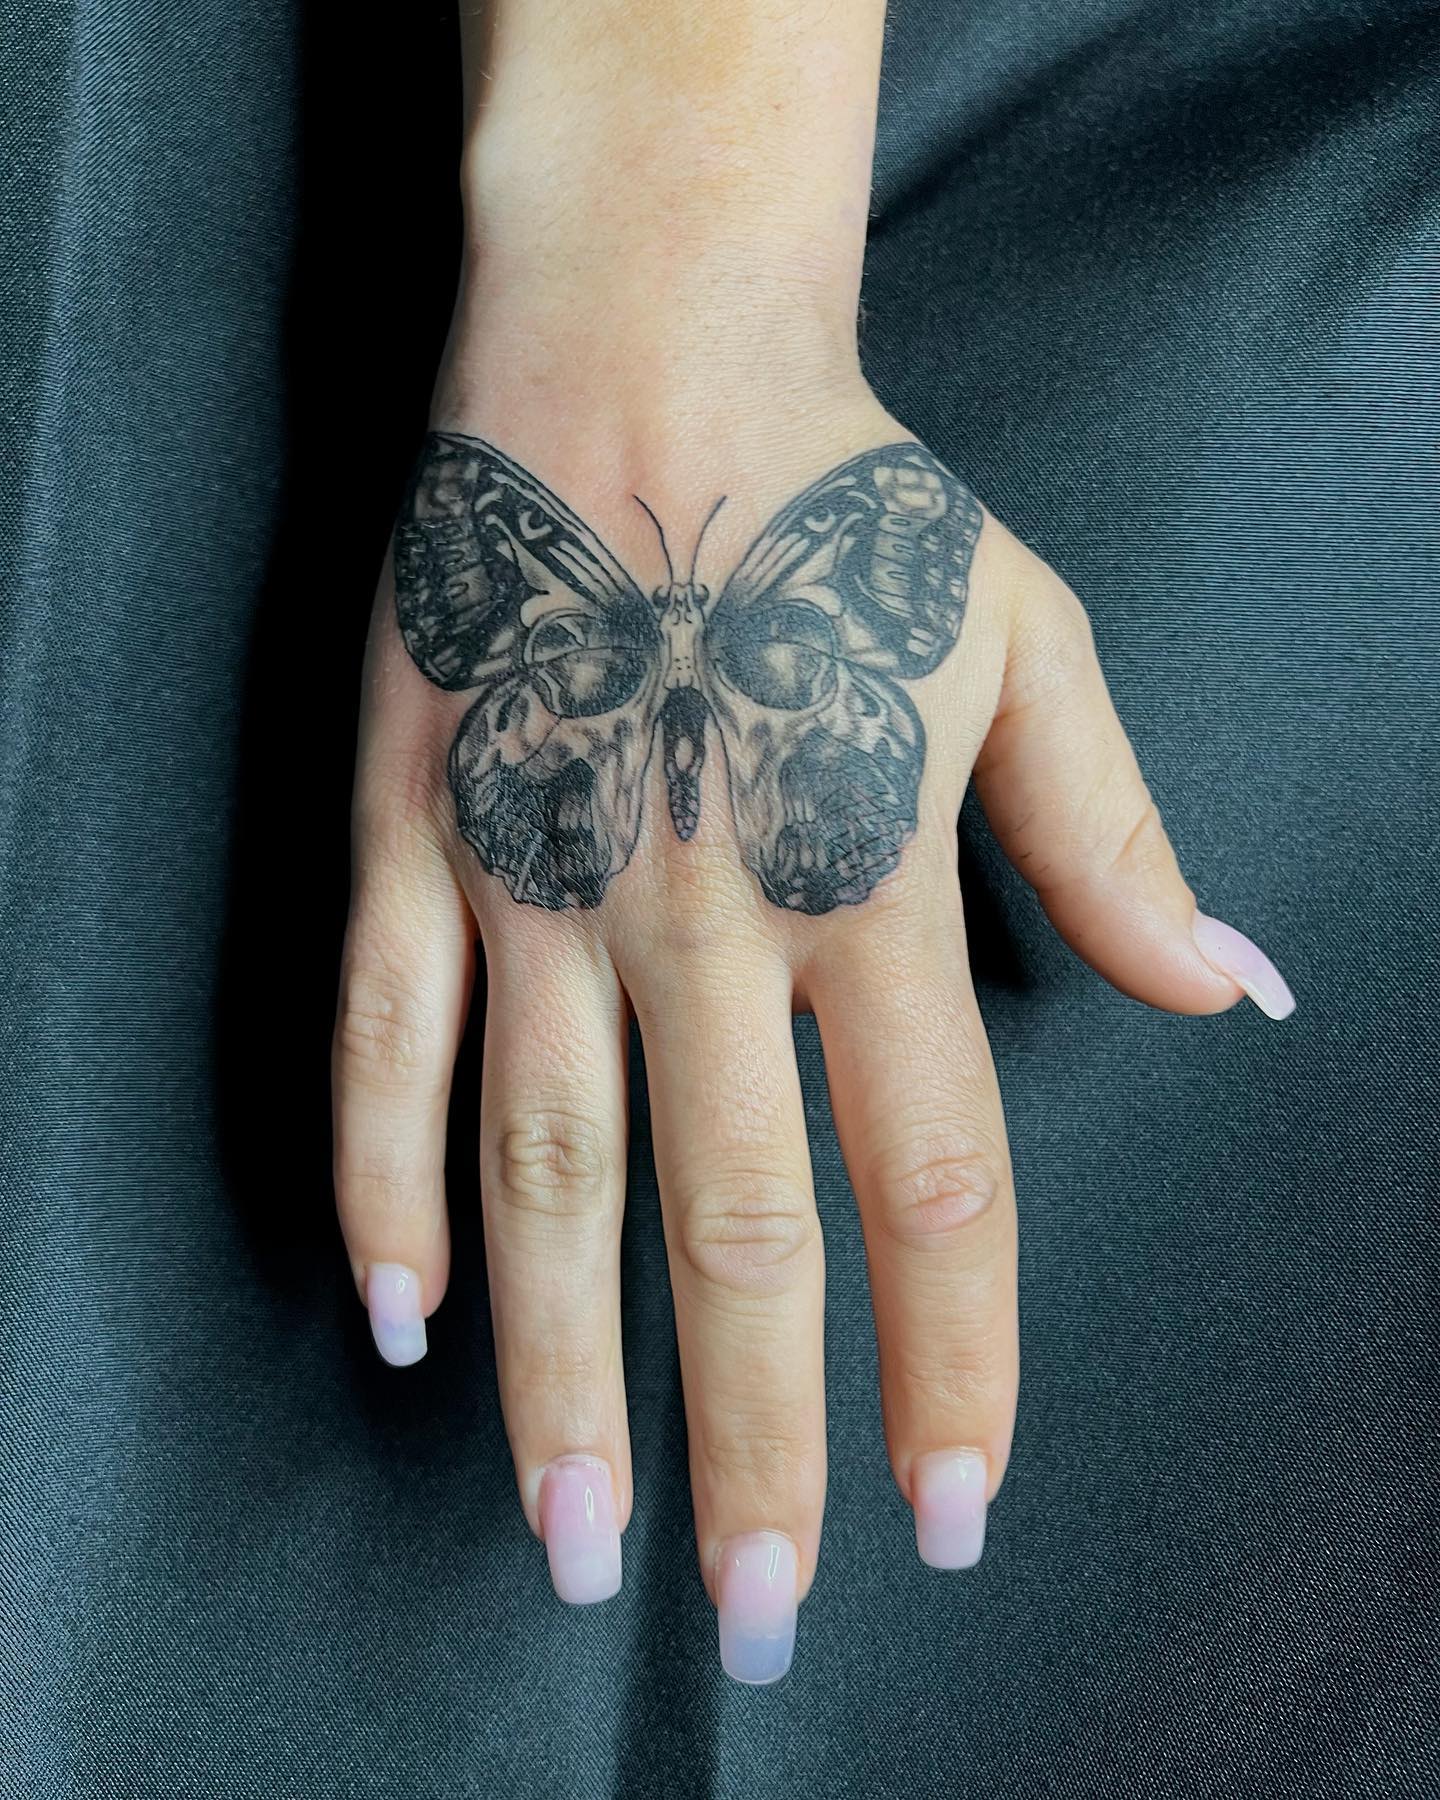 Simple Butterfly skull hand tattoo